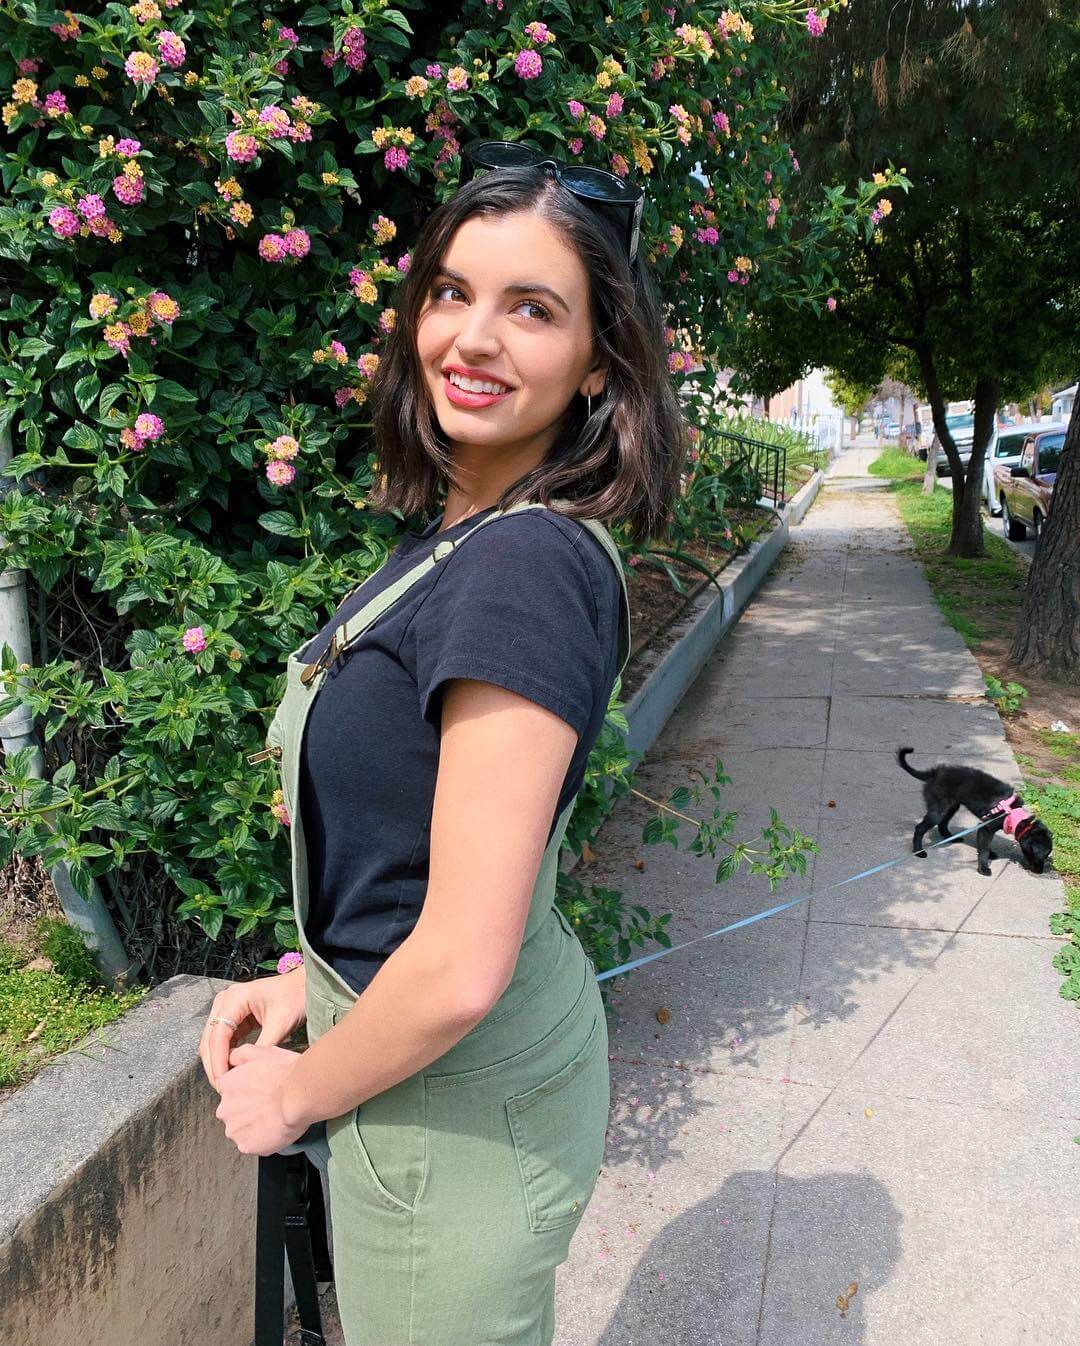 49 Hot Pictures Of Rebecca Black Will Make You Crave For Her – The Viraler